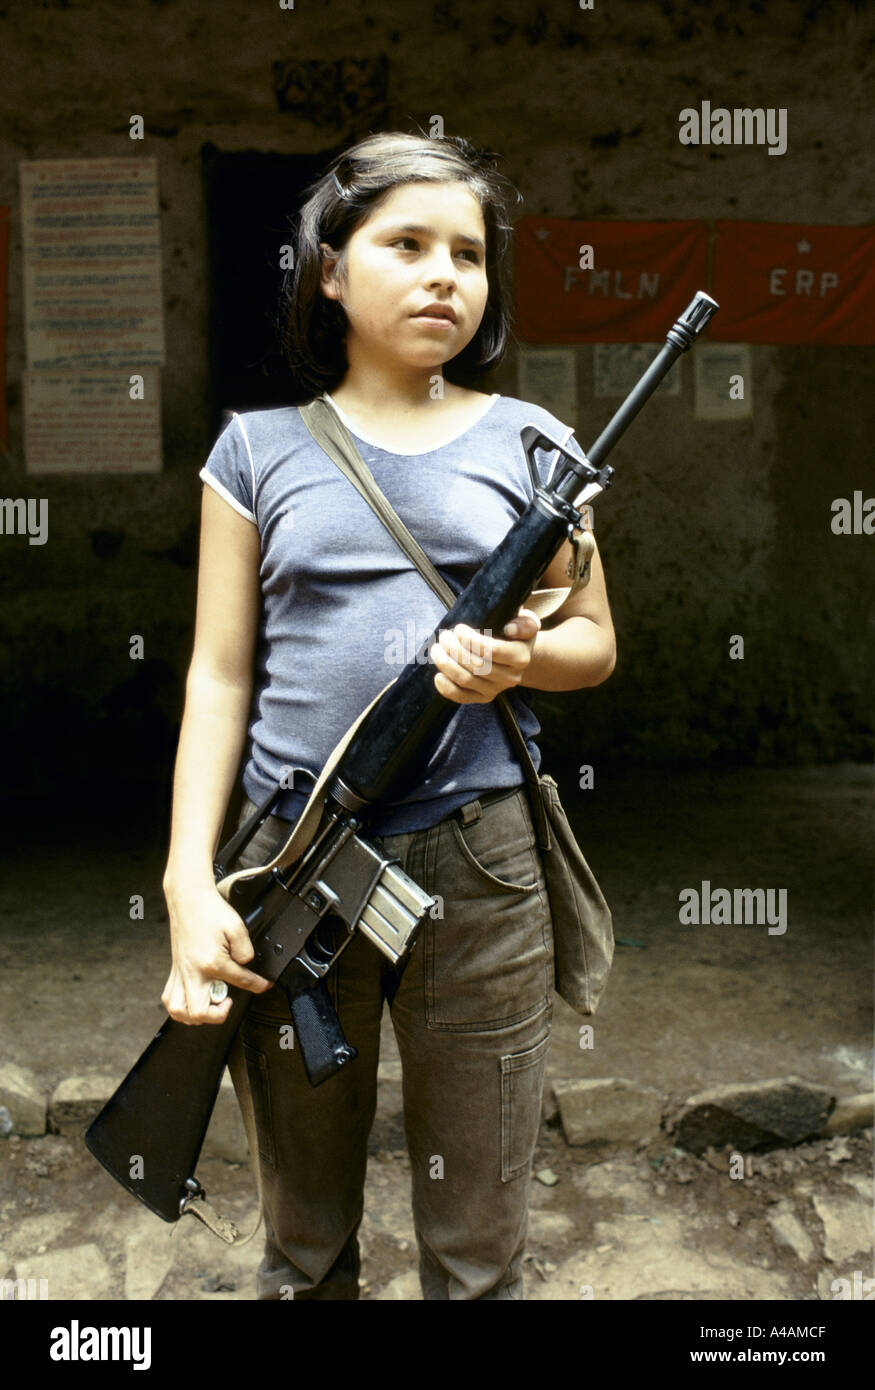 CHALATENANGO,   EL SALVADOR, FEB 1984: - Within the FPL Guerrilla's Zones of Control - A young girl holds an M16 rifle. Stock Photo